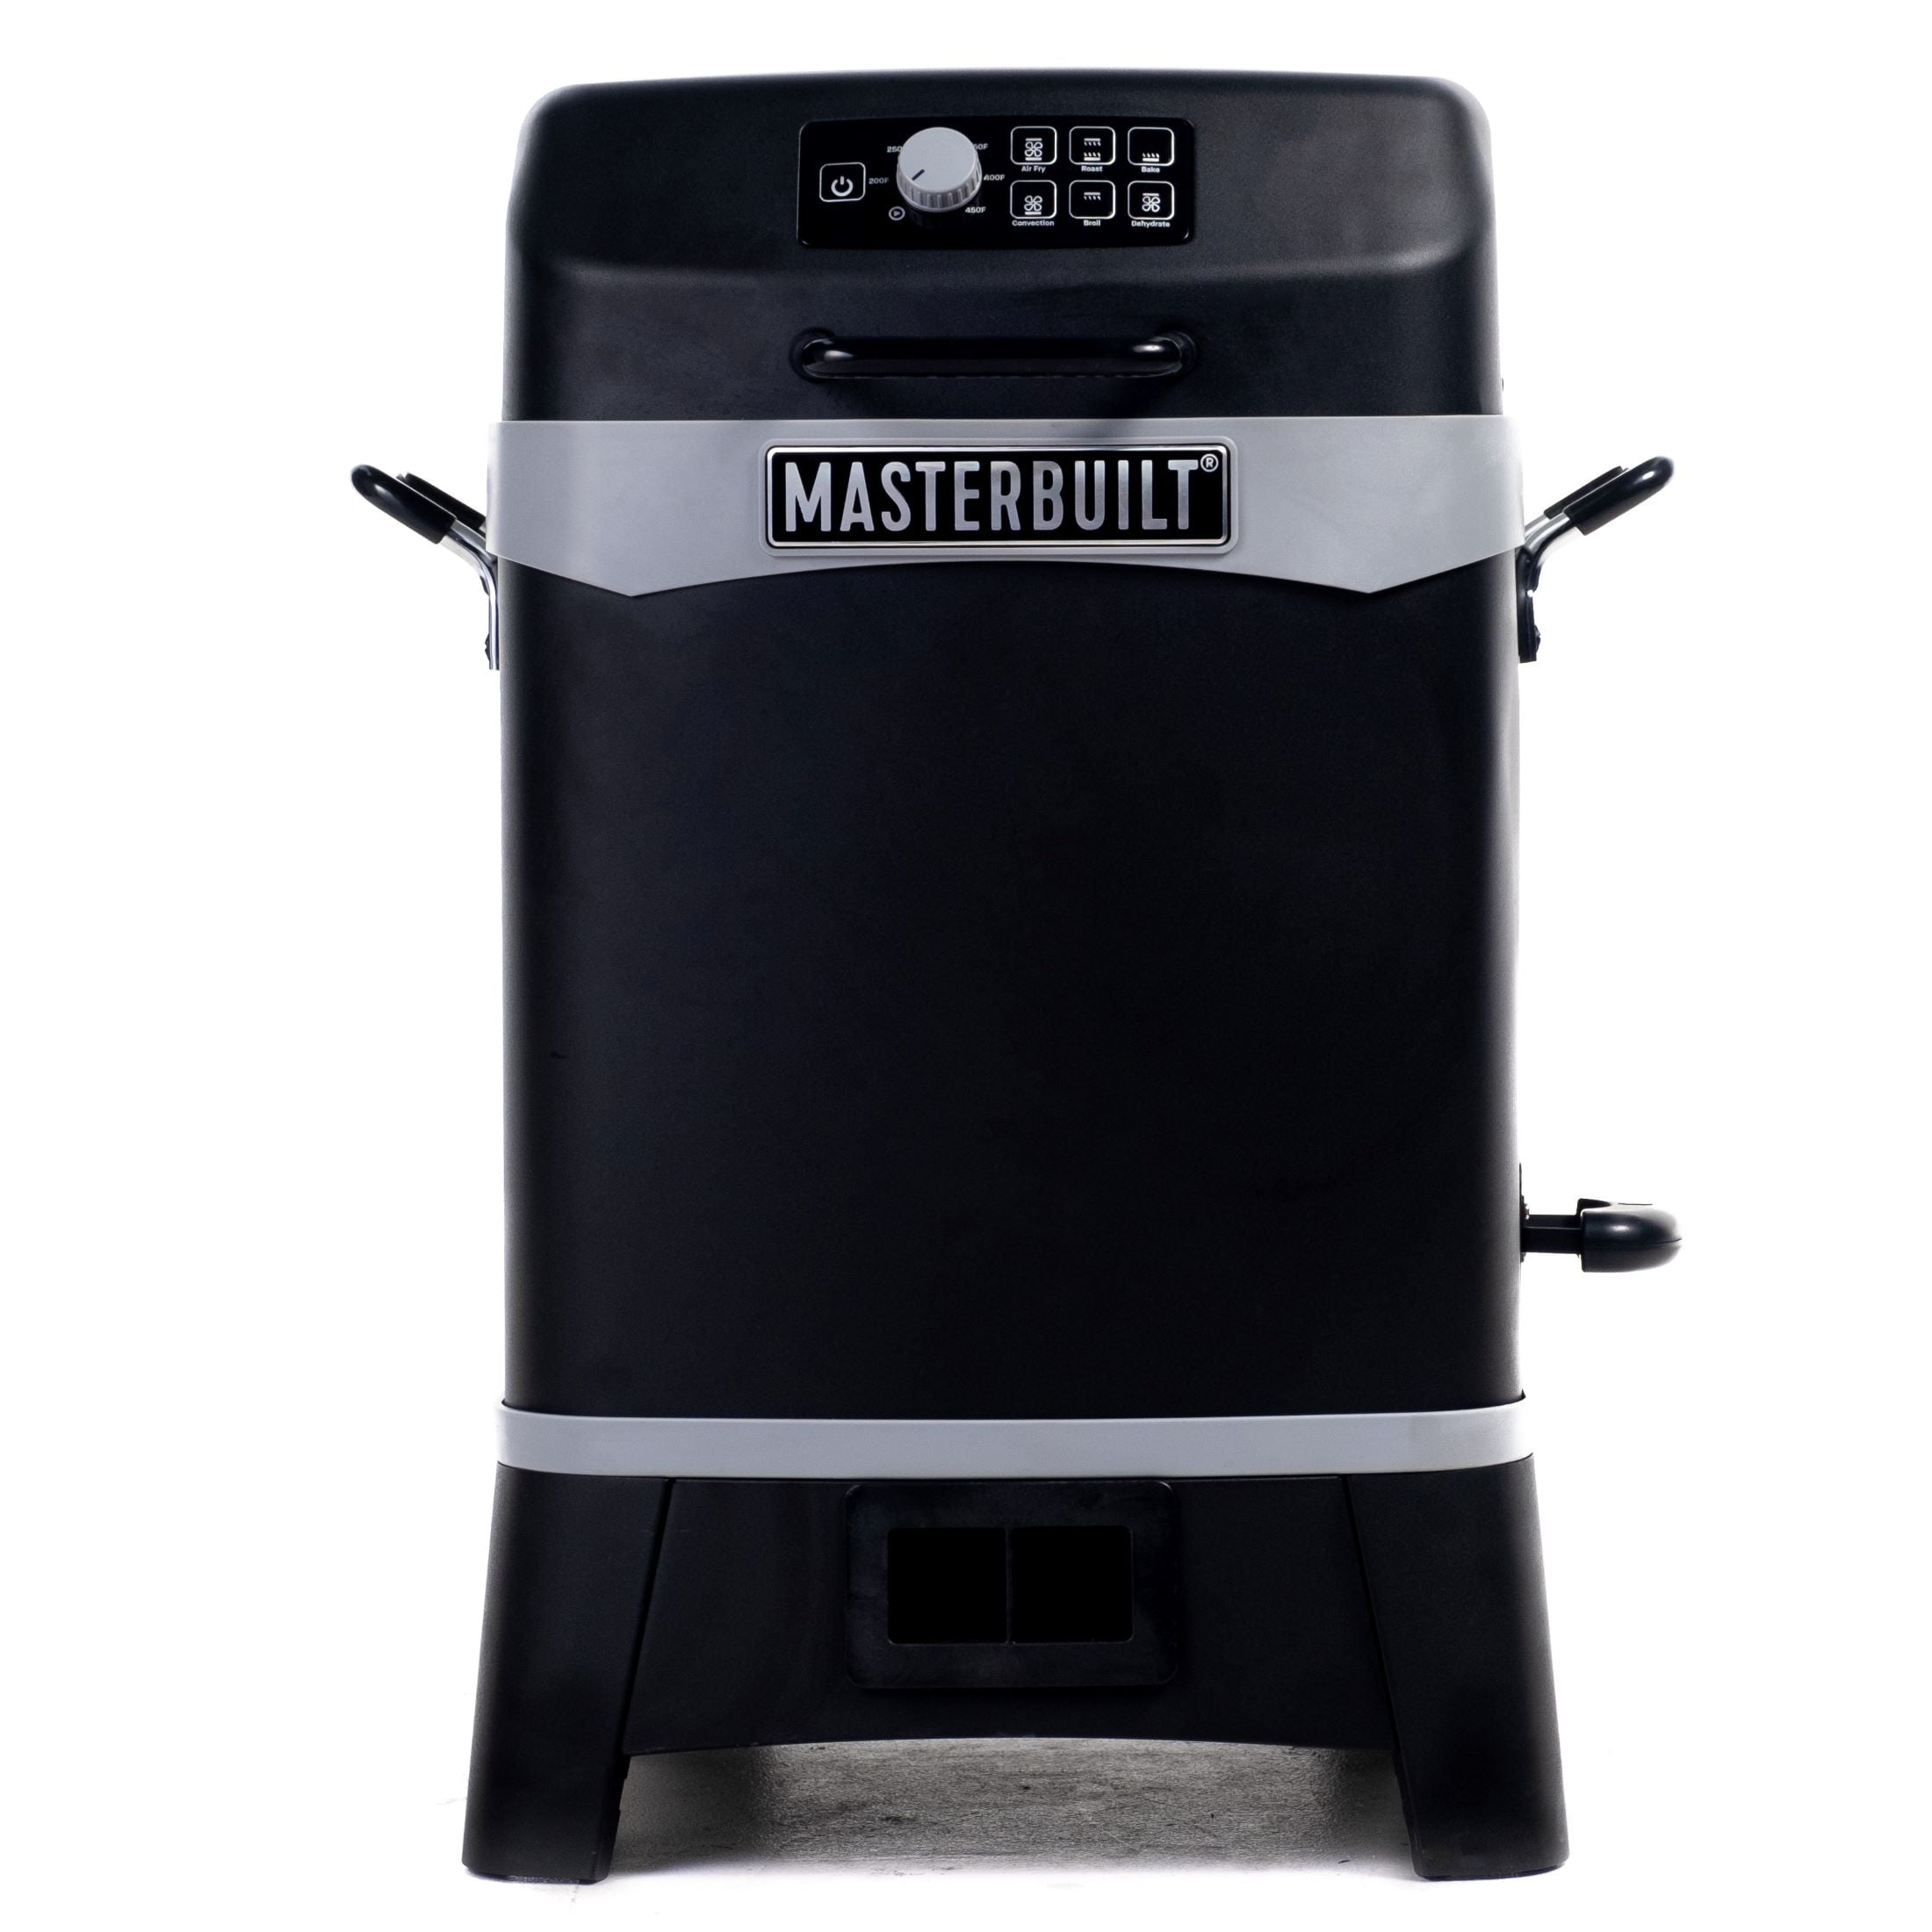 Masterbuilt Air Fryer, 4 Month Review / Does It Work? 